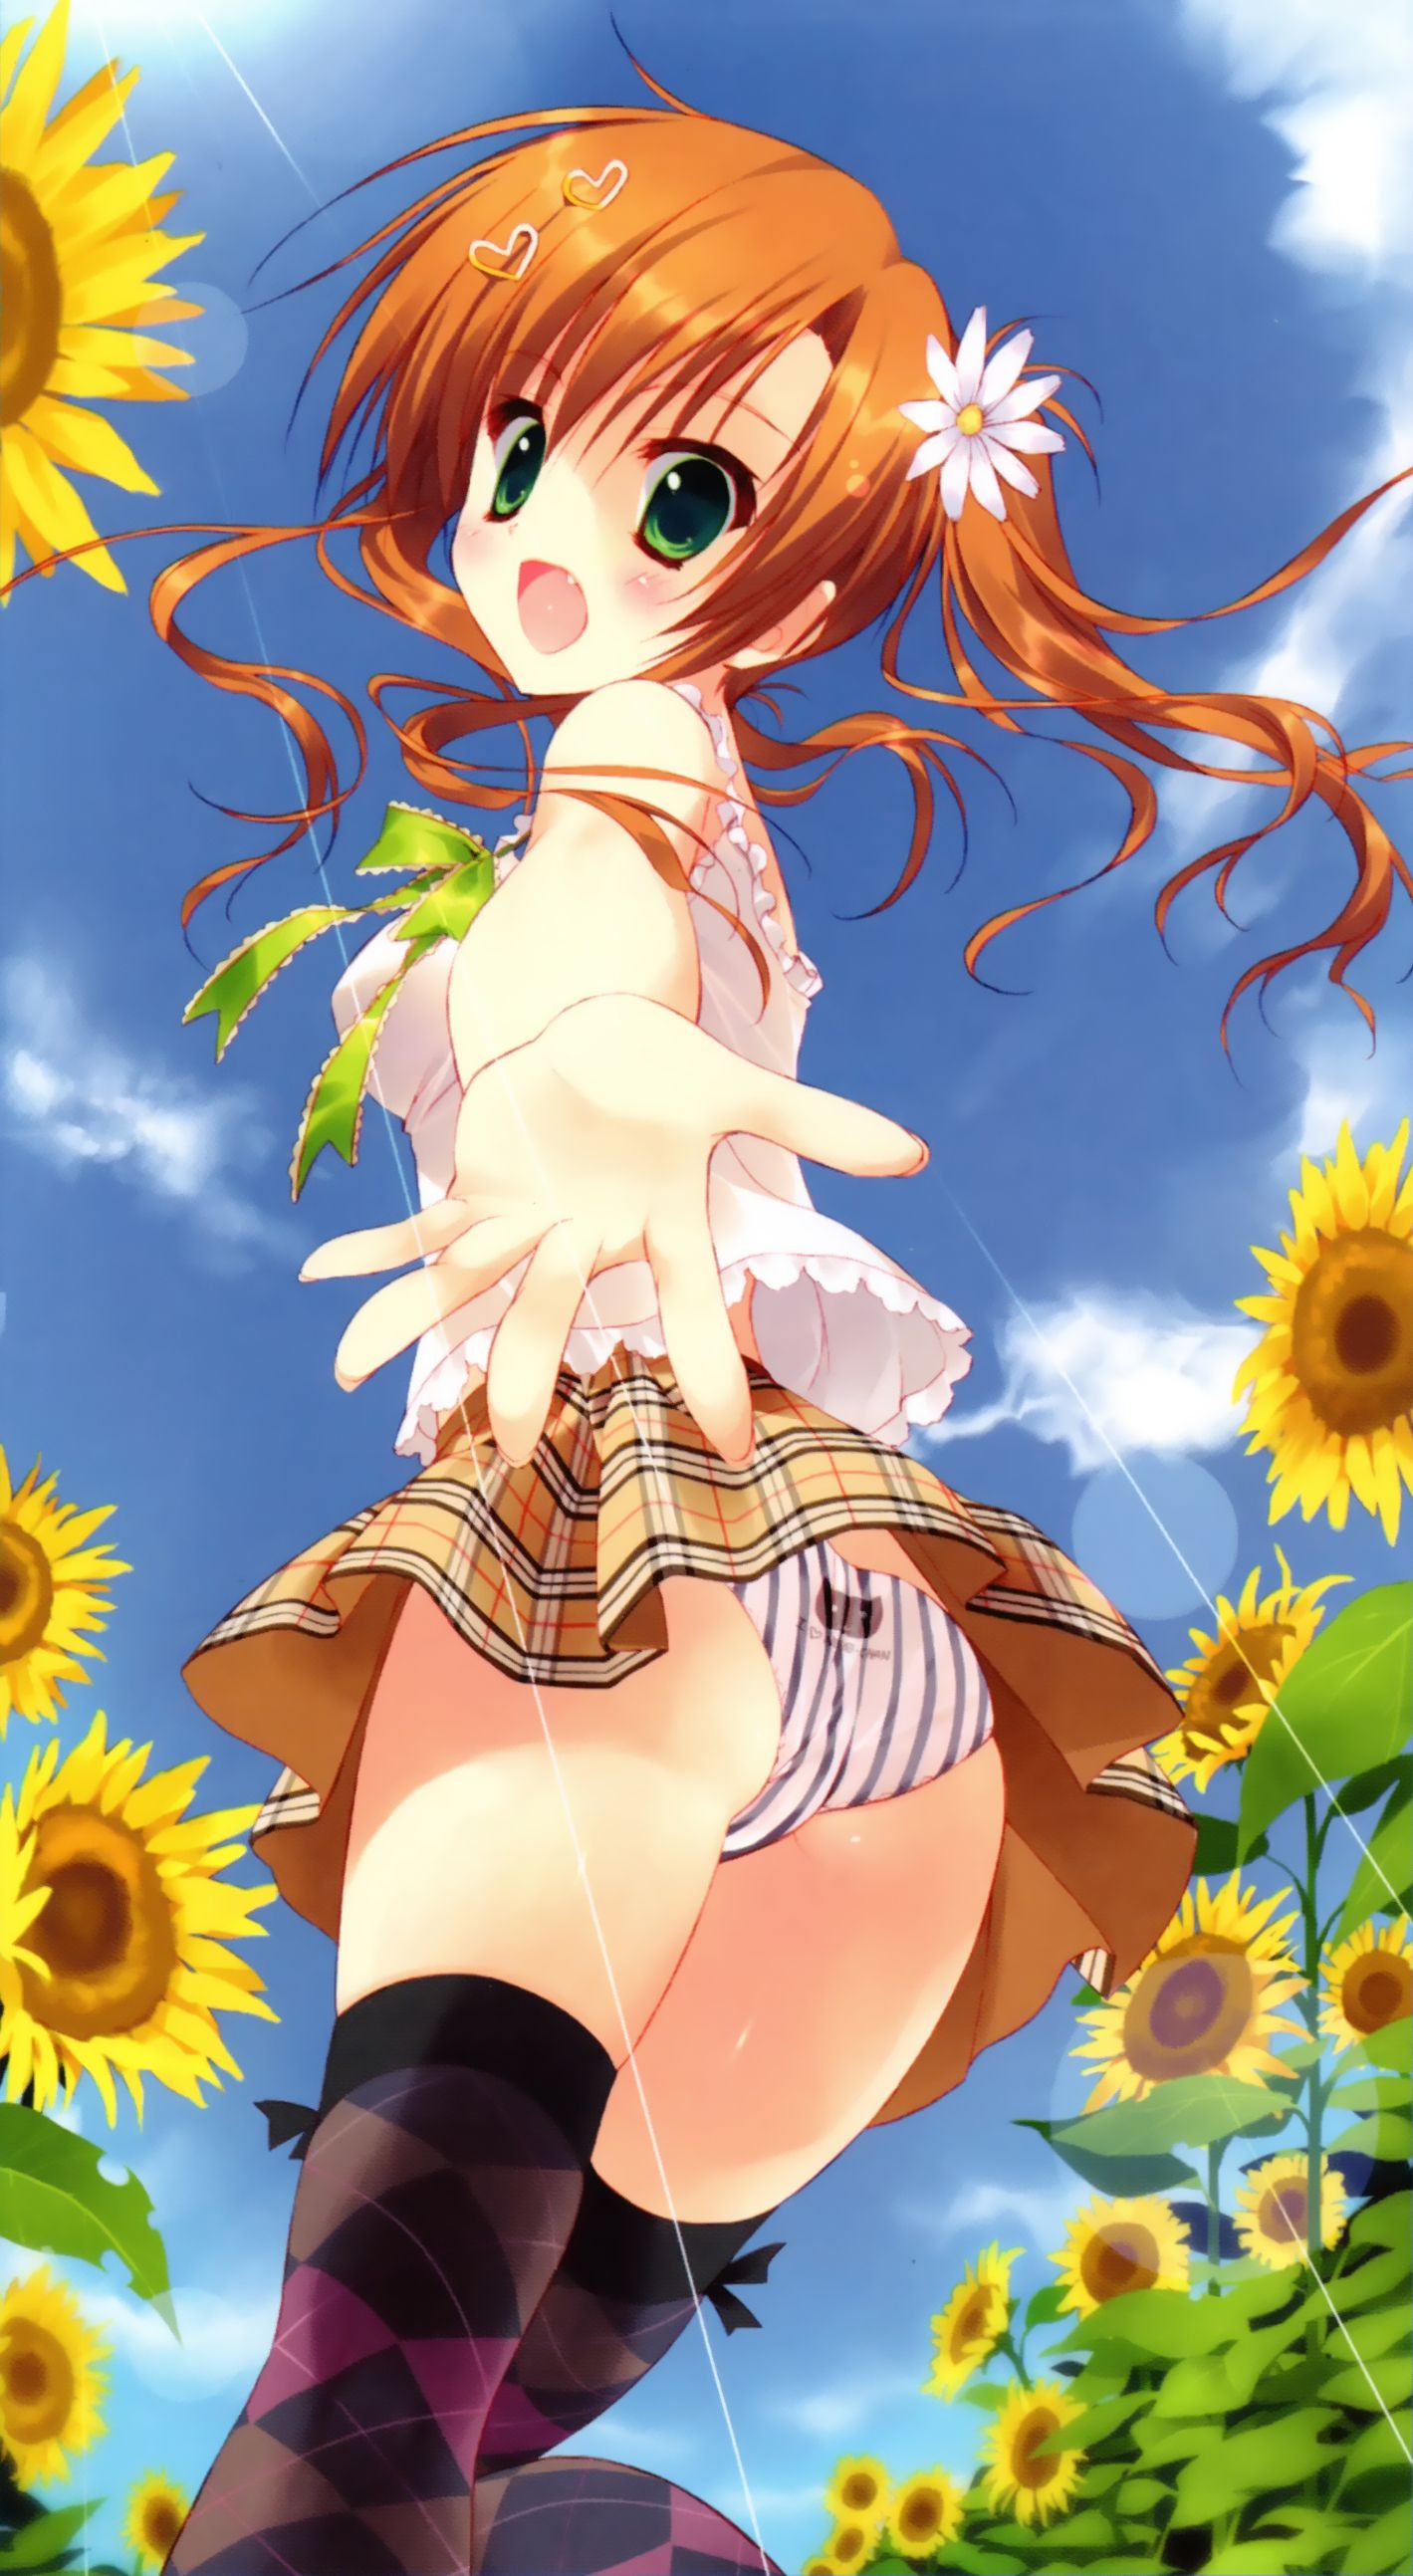 【Erotic Anime Summary】 Erotic image collection of beautiful women and beautiful girls who are punchy [50 sheets] 15